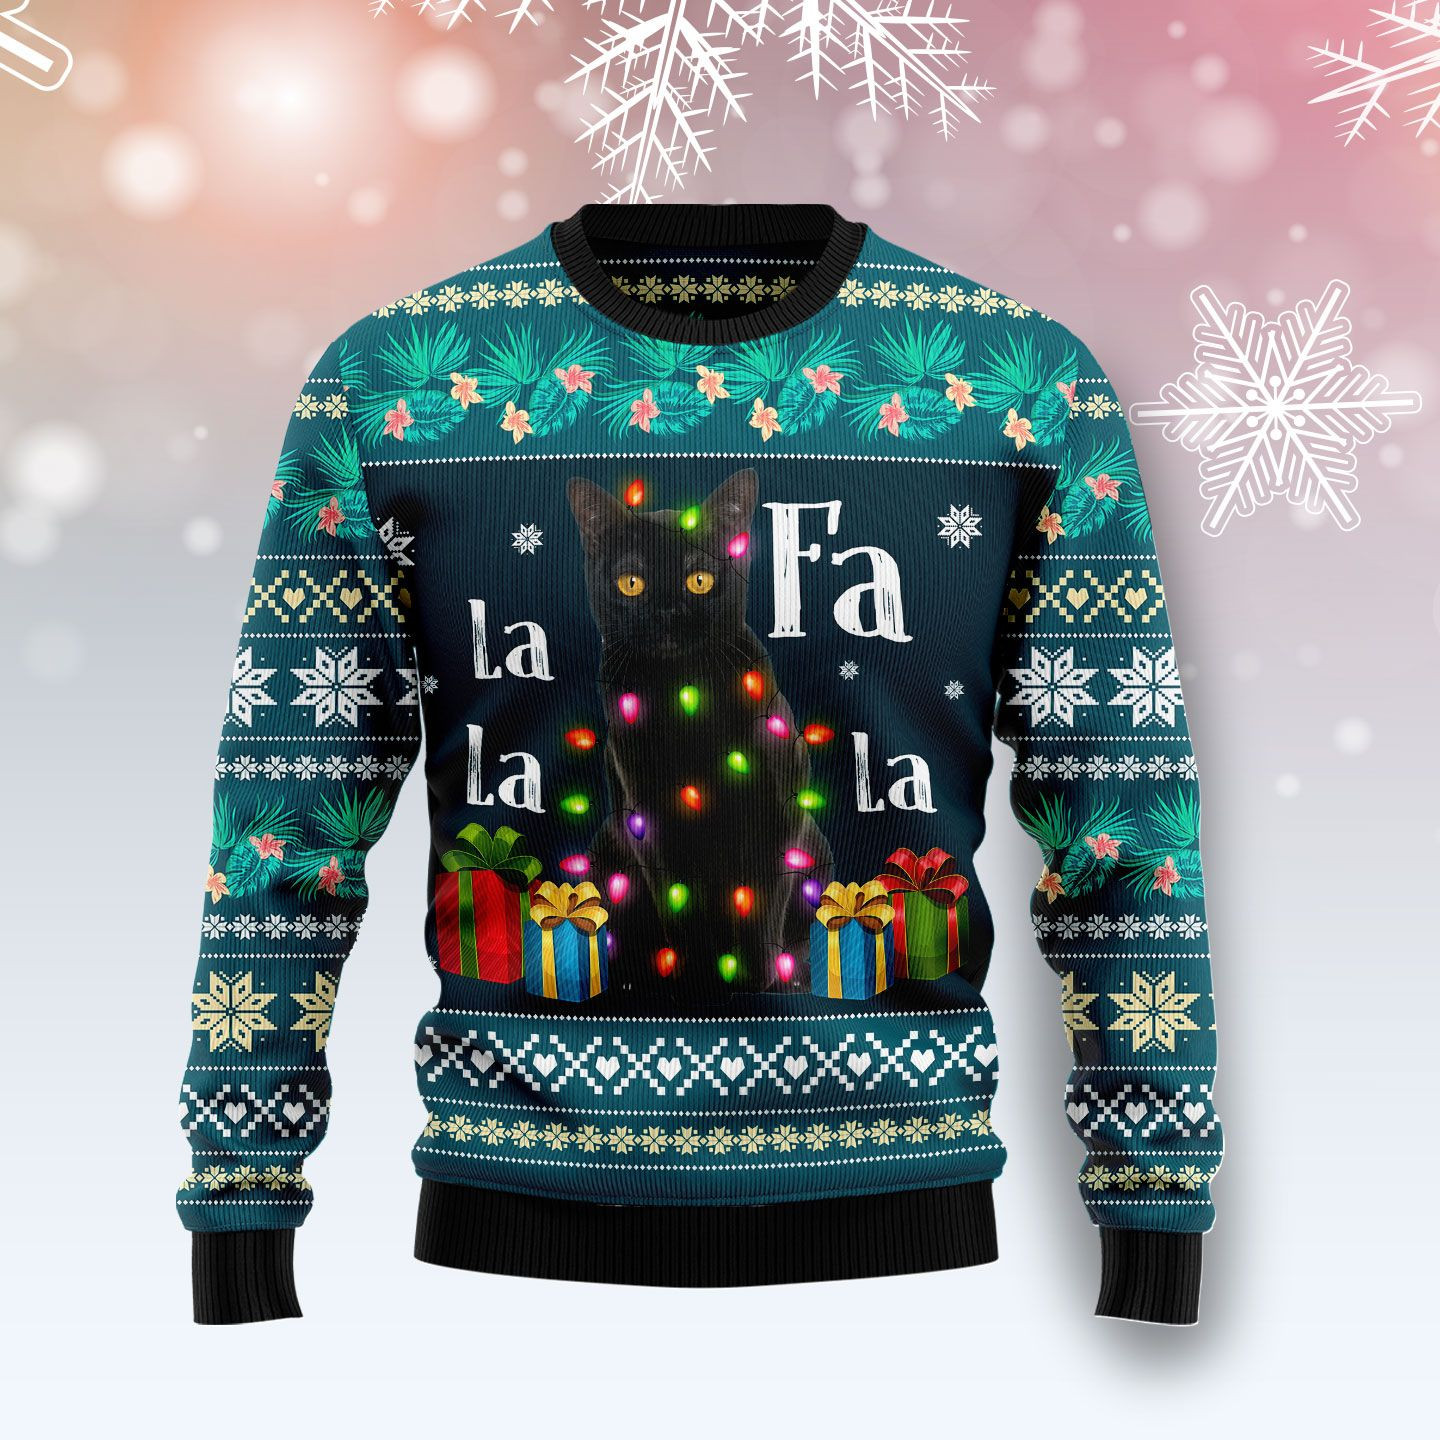 Black Cat Falalala Ugly Christmas Sweater Ugly Sweater For Men Women